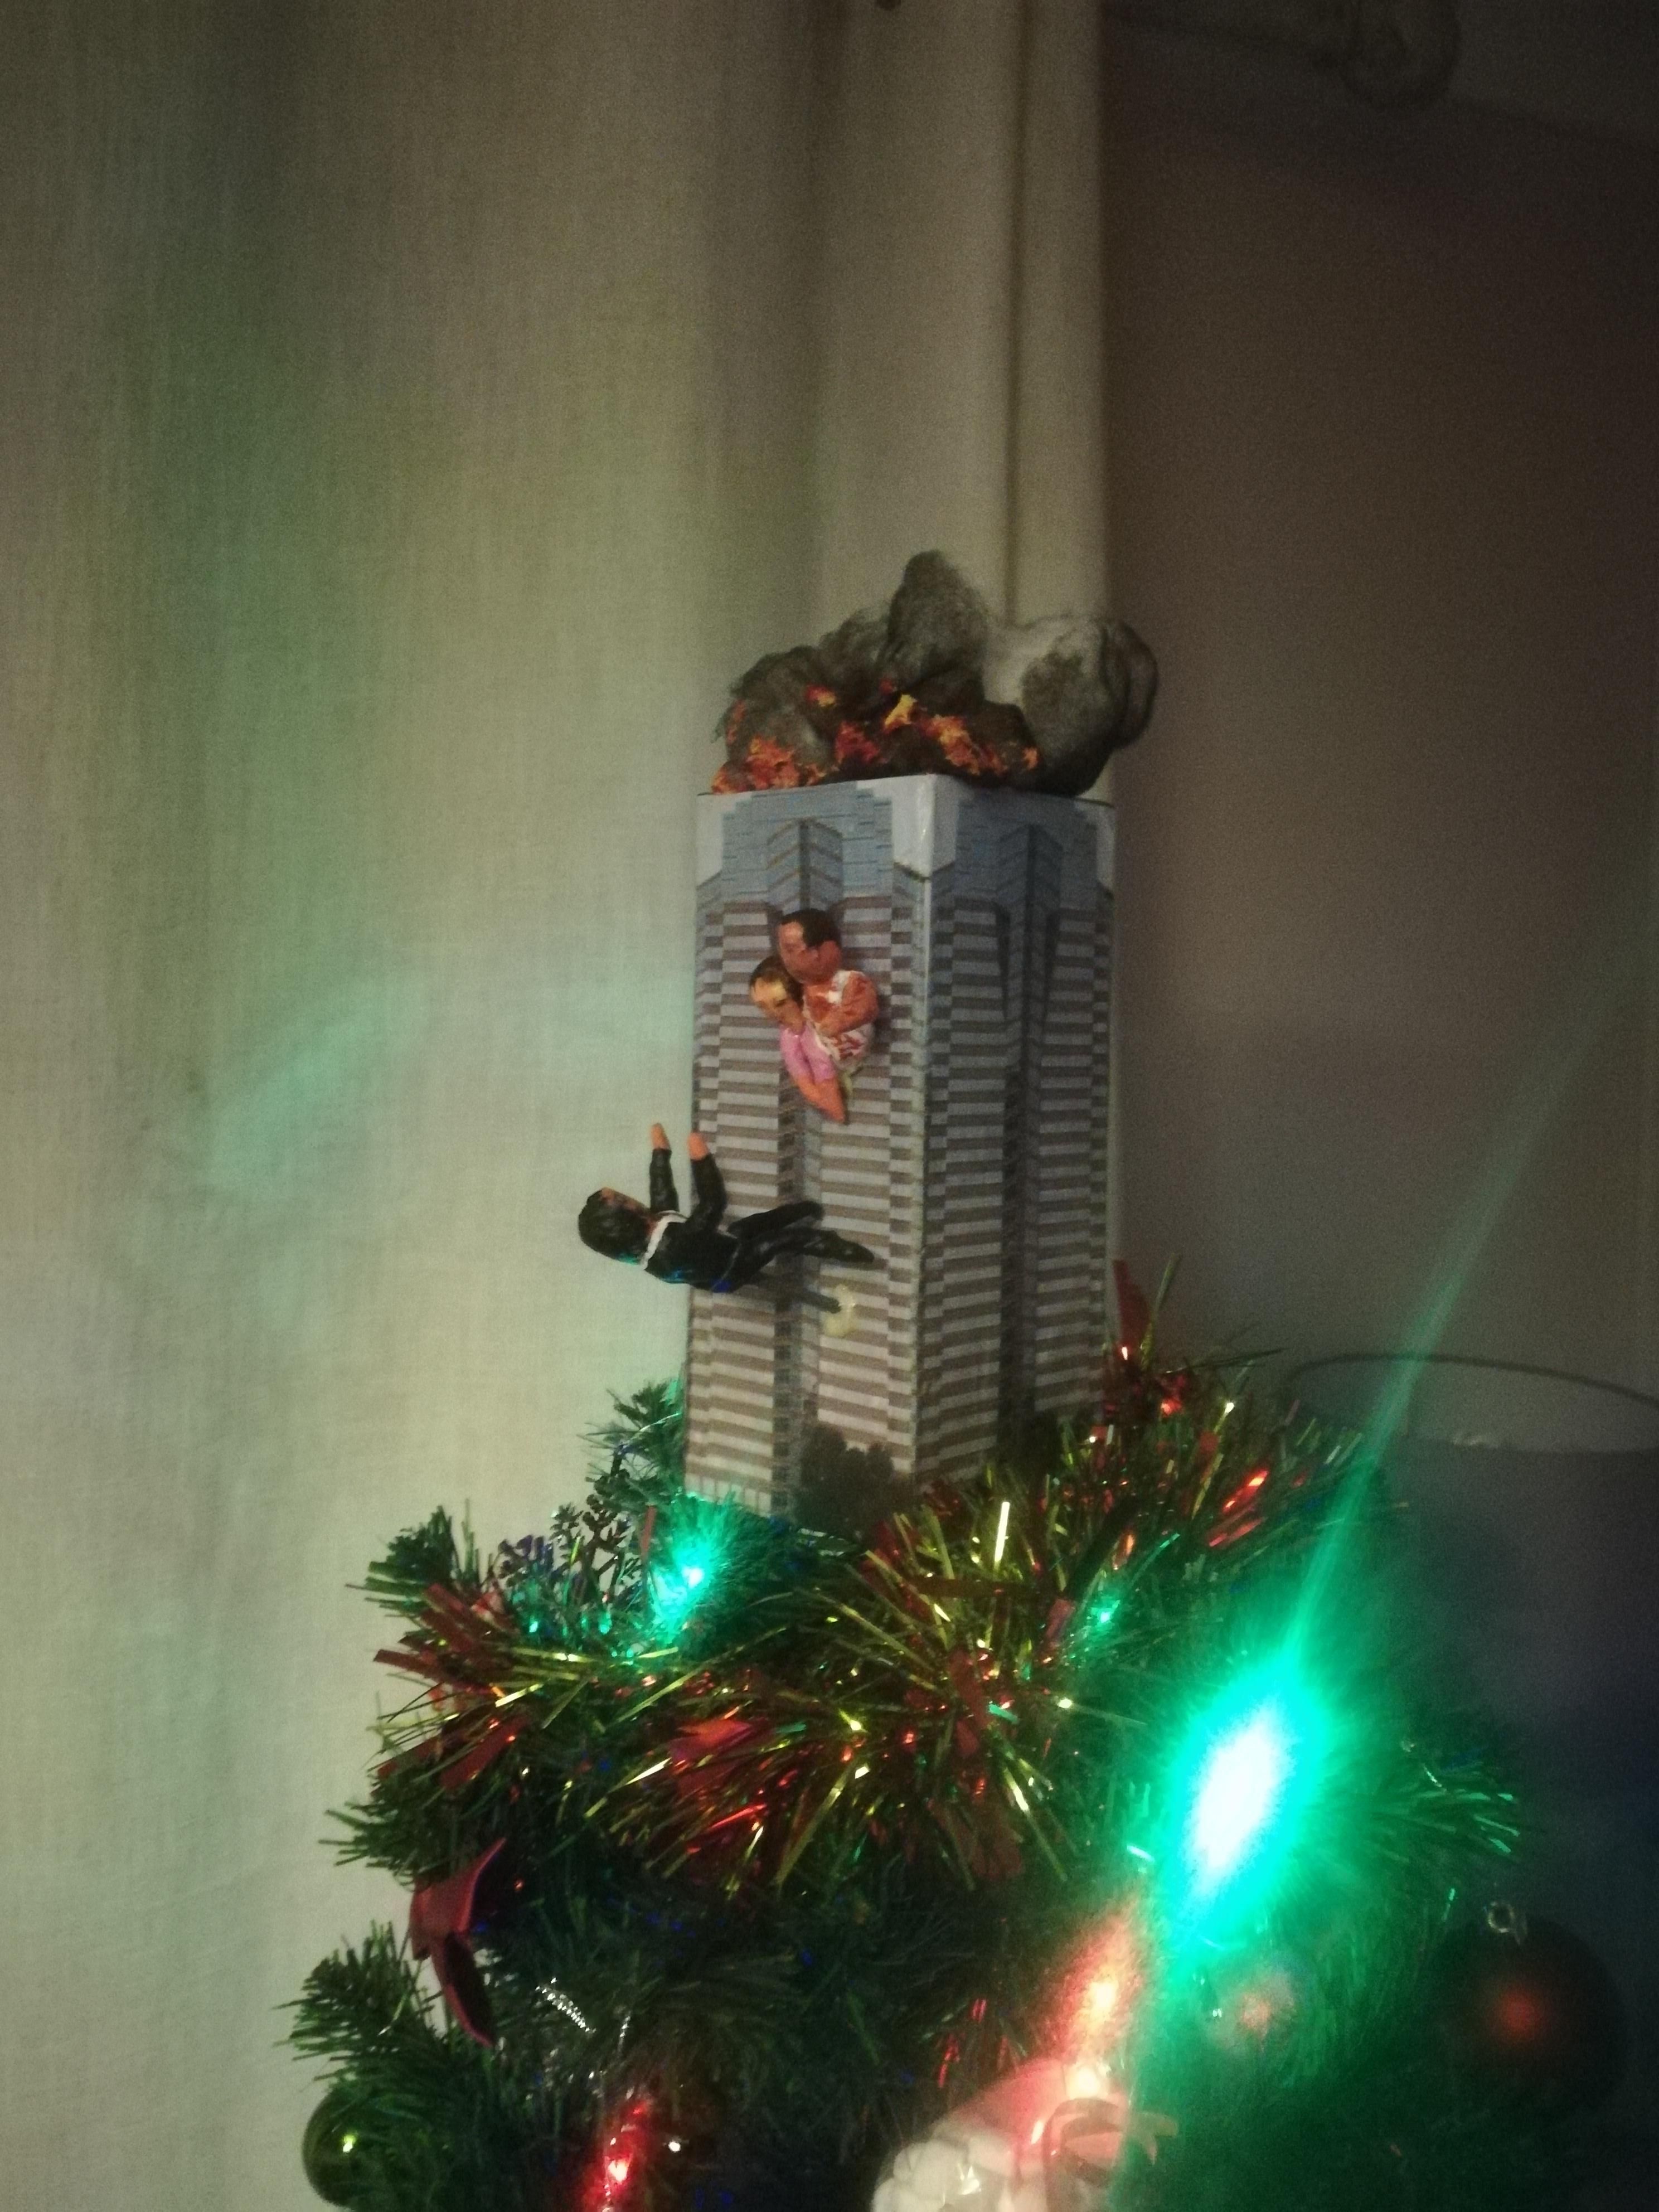 Its not Christmas until Hans Gruber falls off the top of the Christmas Tree